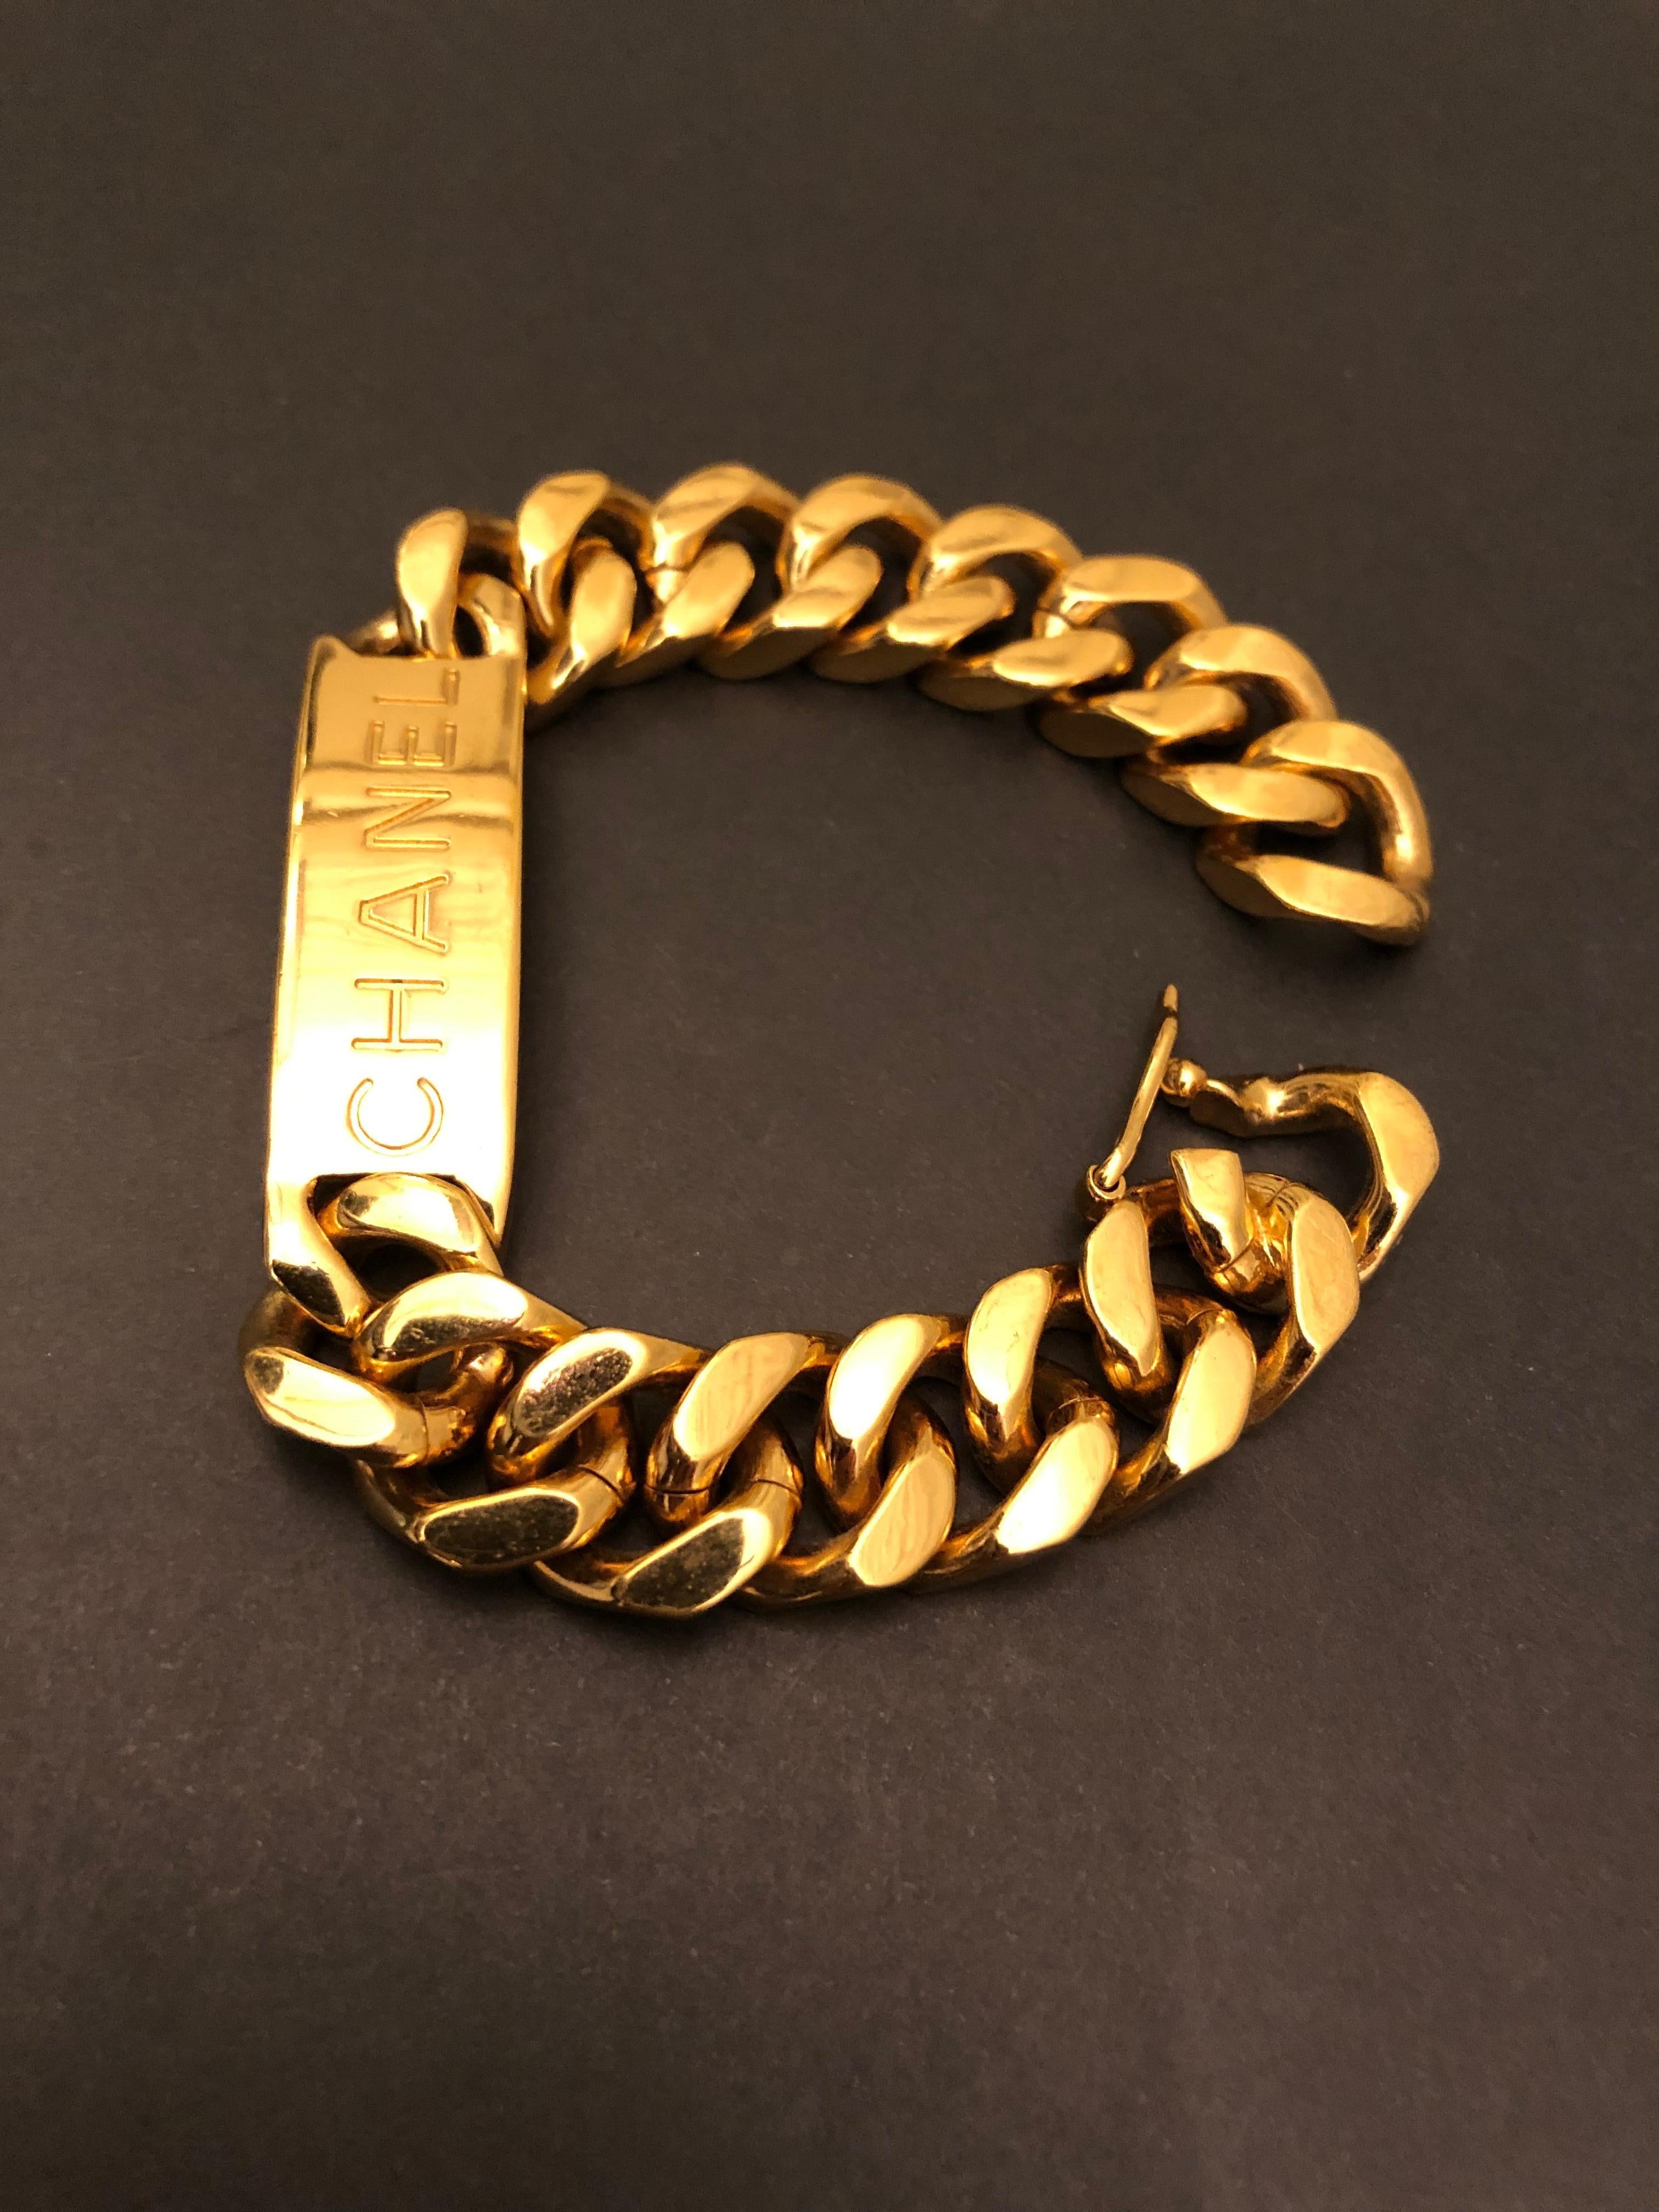 This vintage Chanel chain link bracelet is crafted of good toned metal. Hook fastening. Stamped CHANEL 96P made in France. Inner circumference measures approximately 19.5 cm. Comes with box.

Condition: Excellent vintage condition with minimal signs